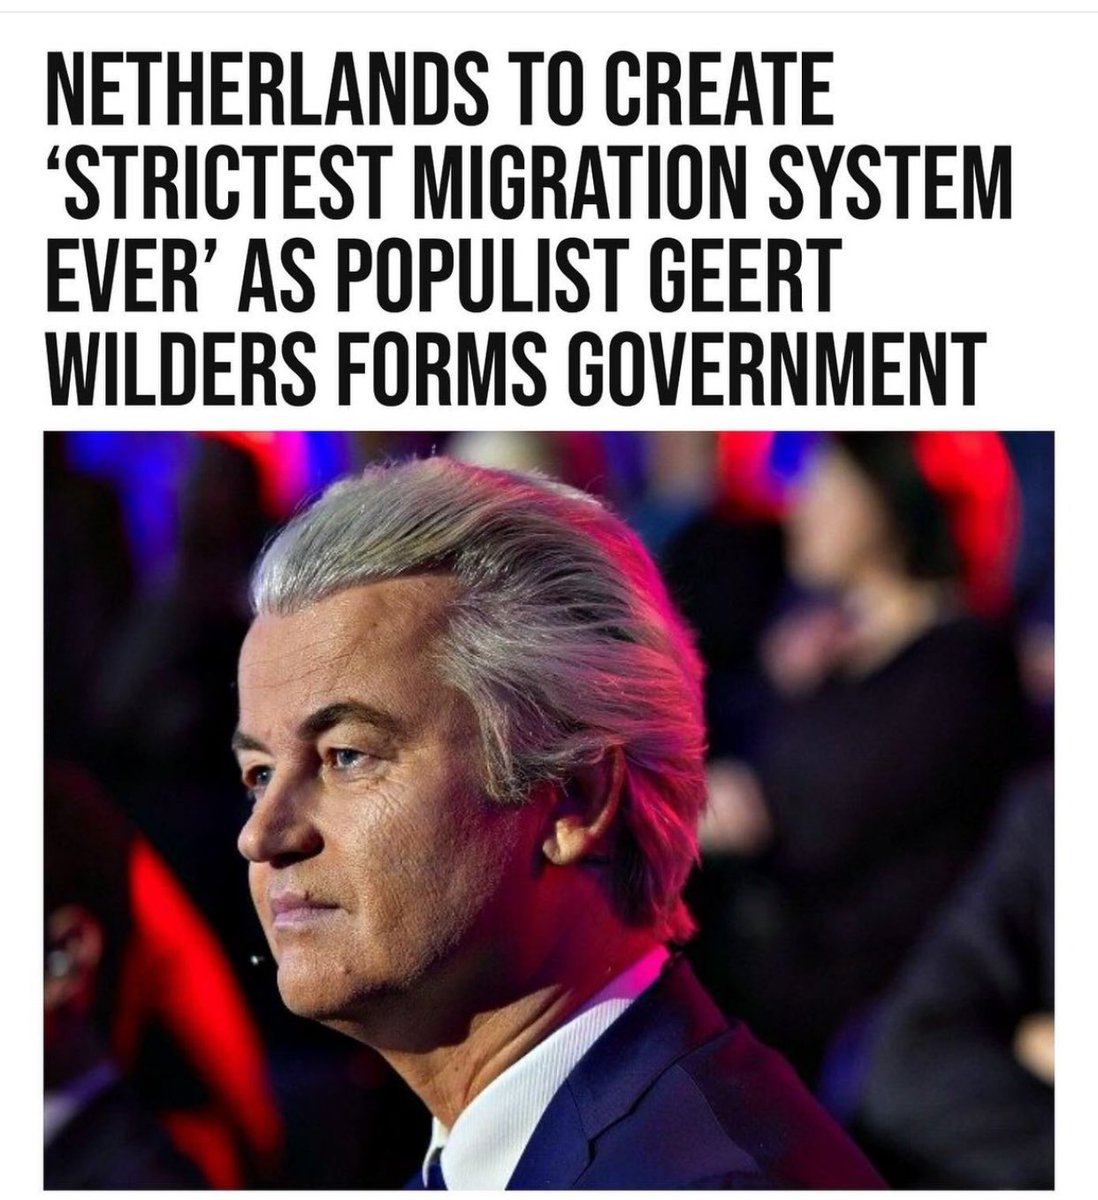 Netherlands might be a good place to move to if USA gets over-run with illegals What do you think?